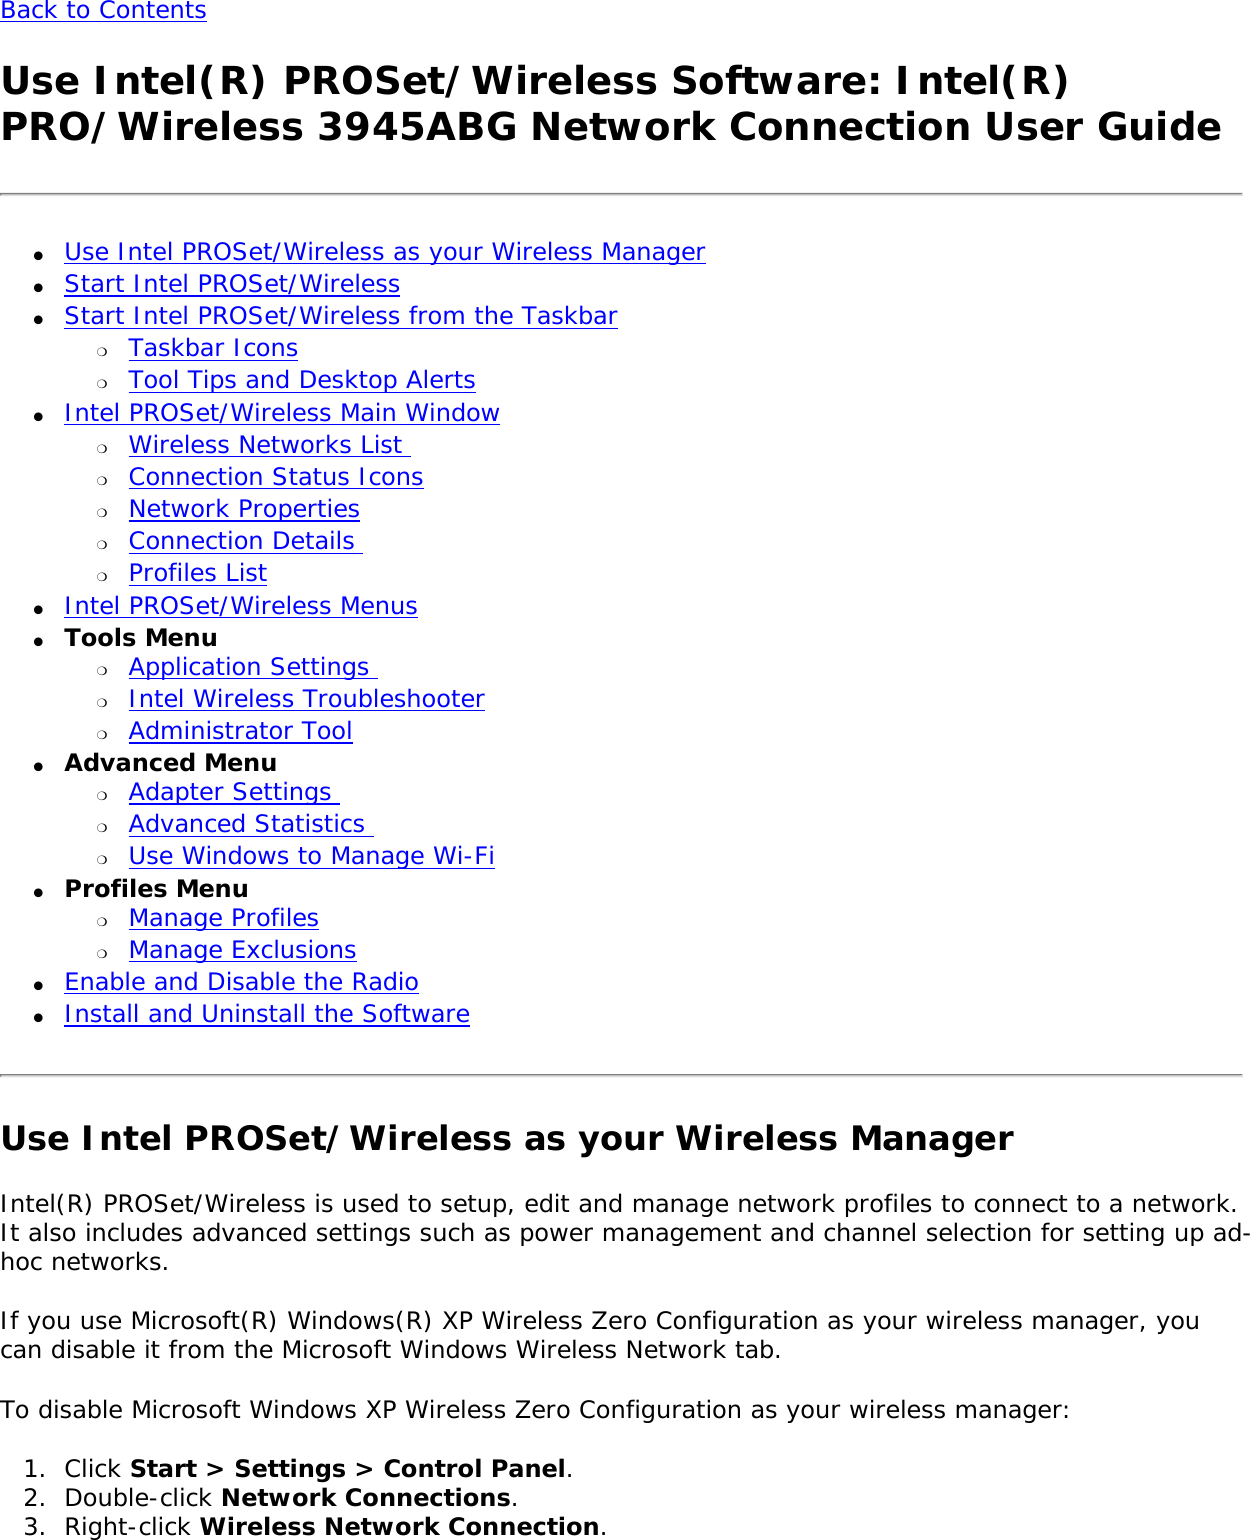 Back to Contents Use Intel(R) PROSet/Wireless Software: Intel(R) PRO/Wireless 3945ABG Network Connection User Guide●     Use Intel PROSet/Wireless as your Wireless Manager●     Start Intel PROSet/Wireless ●     Start Intel PROSet/Wireless from the Taskbar ❍     Taskbar Icons ❍     Tool Tips and Desktop Alerts ●     Intel PROSet/Wireless Main Window ❍     Wireless Networks List ❍     Connection Status Icons❍     Network Properties❍     Connection Details ❍     Profiles List ●     Intel PROSet/Wireless Menus ●     Tools Menu ❍     Application Settings ❍     Intel Wireless Troubleshooter❍     Administrator Tool●     Advanced Menu ❍     Adapter Settings ❍     Advanced Statistics ❍     Use Windows to Manage Wi-Fi●     Profiles Menu ❍     Manage Profiles❍     Manage Exclusions●     Enable and Disable the Radio●     Install and Uninstall the Software Use Intel PROSet/Wireless as your Wireless ManagerIntel(R) PROSet/Wireless is used to setup, edit and manage network profiles to connect to a network. It also includes advanced settings such as power management and channel selection for setting up ad-hoc networks.  If you use Microsoft(R) Windows(R) XP Wireless Zero Configuration as your wireless manager, you can disable it from the Microsoft Windows Wireless Network tab. To disable Microsoft Windows XP Wireless Zero Configuration as your wireless manager: 1.  Click Start &gt; Settings &gt; Control Panel. 2.  Double-click Network Connections.3.  Right-click Wireless Network Connection.